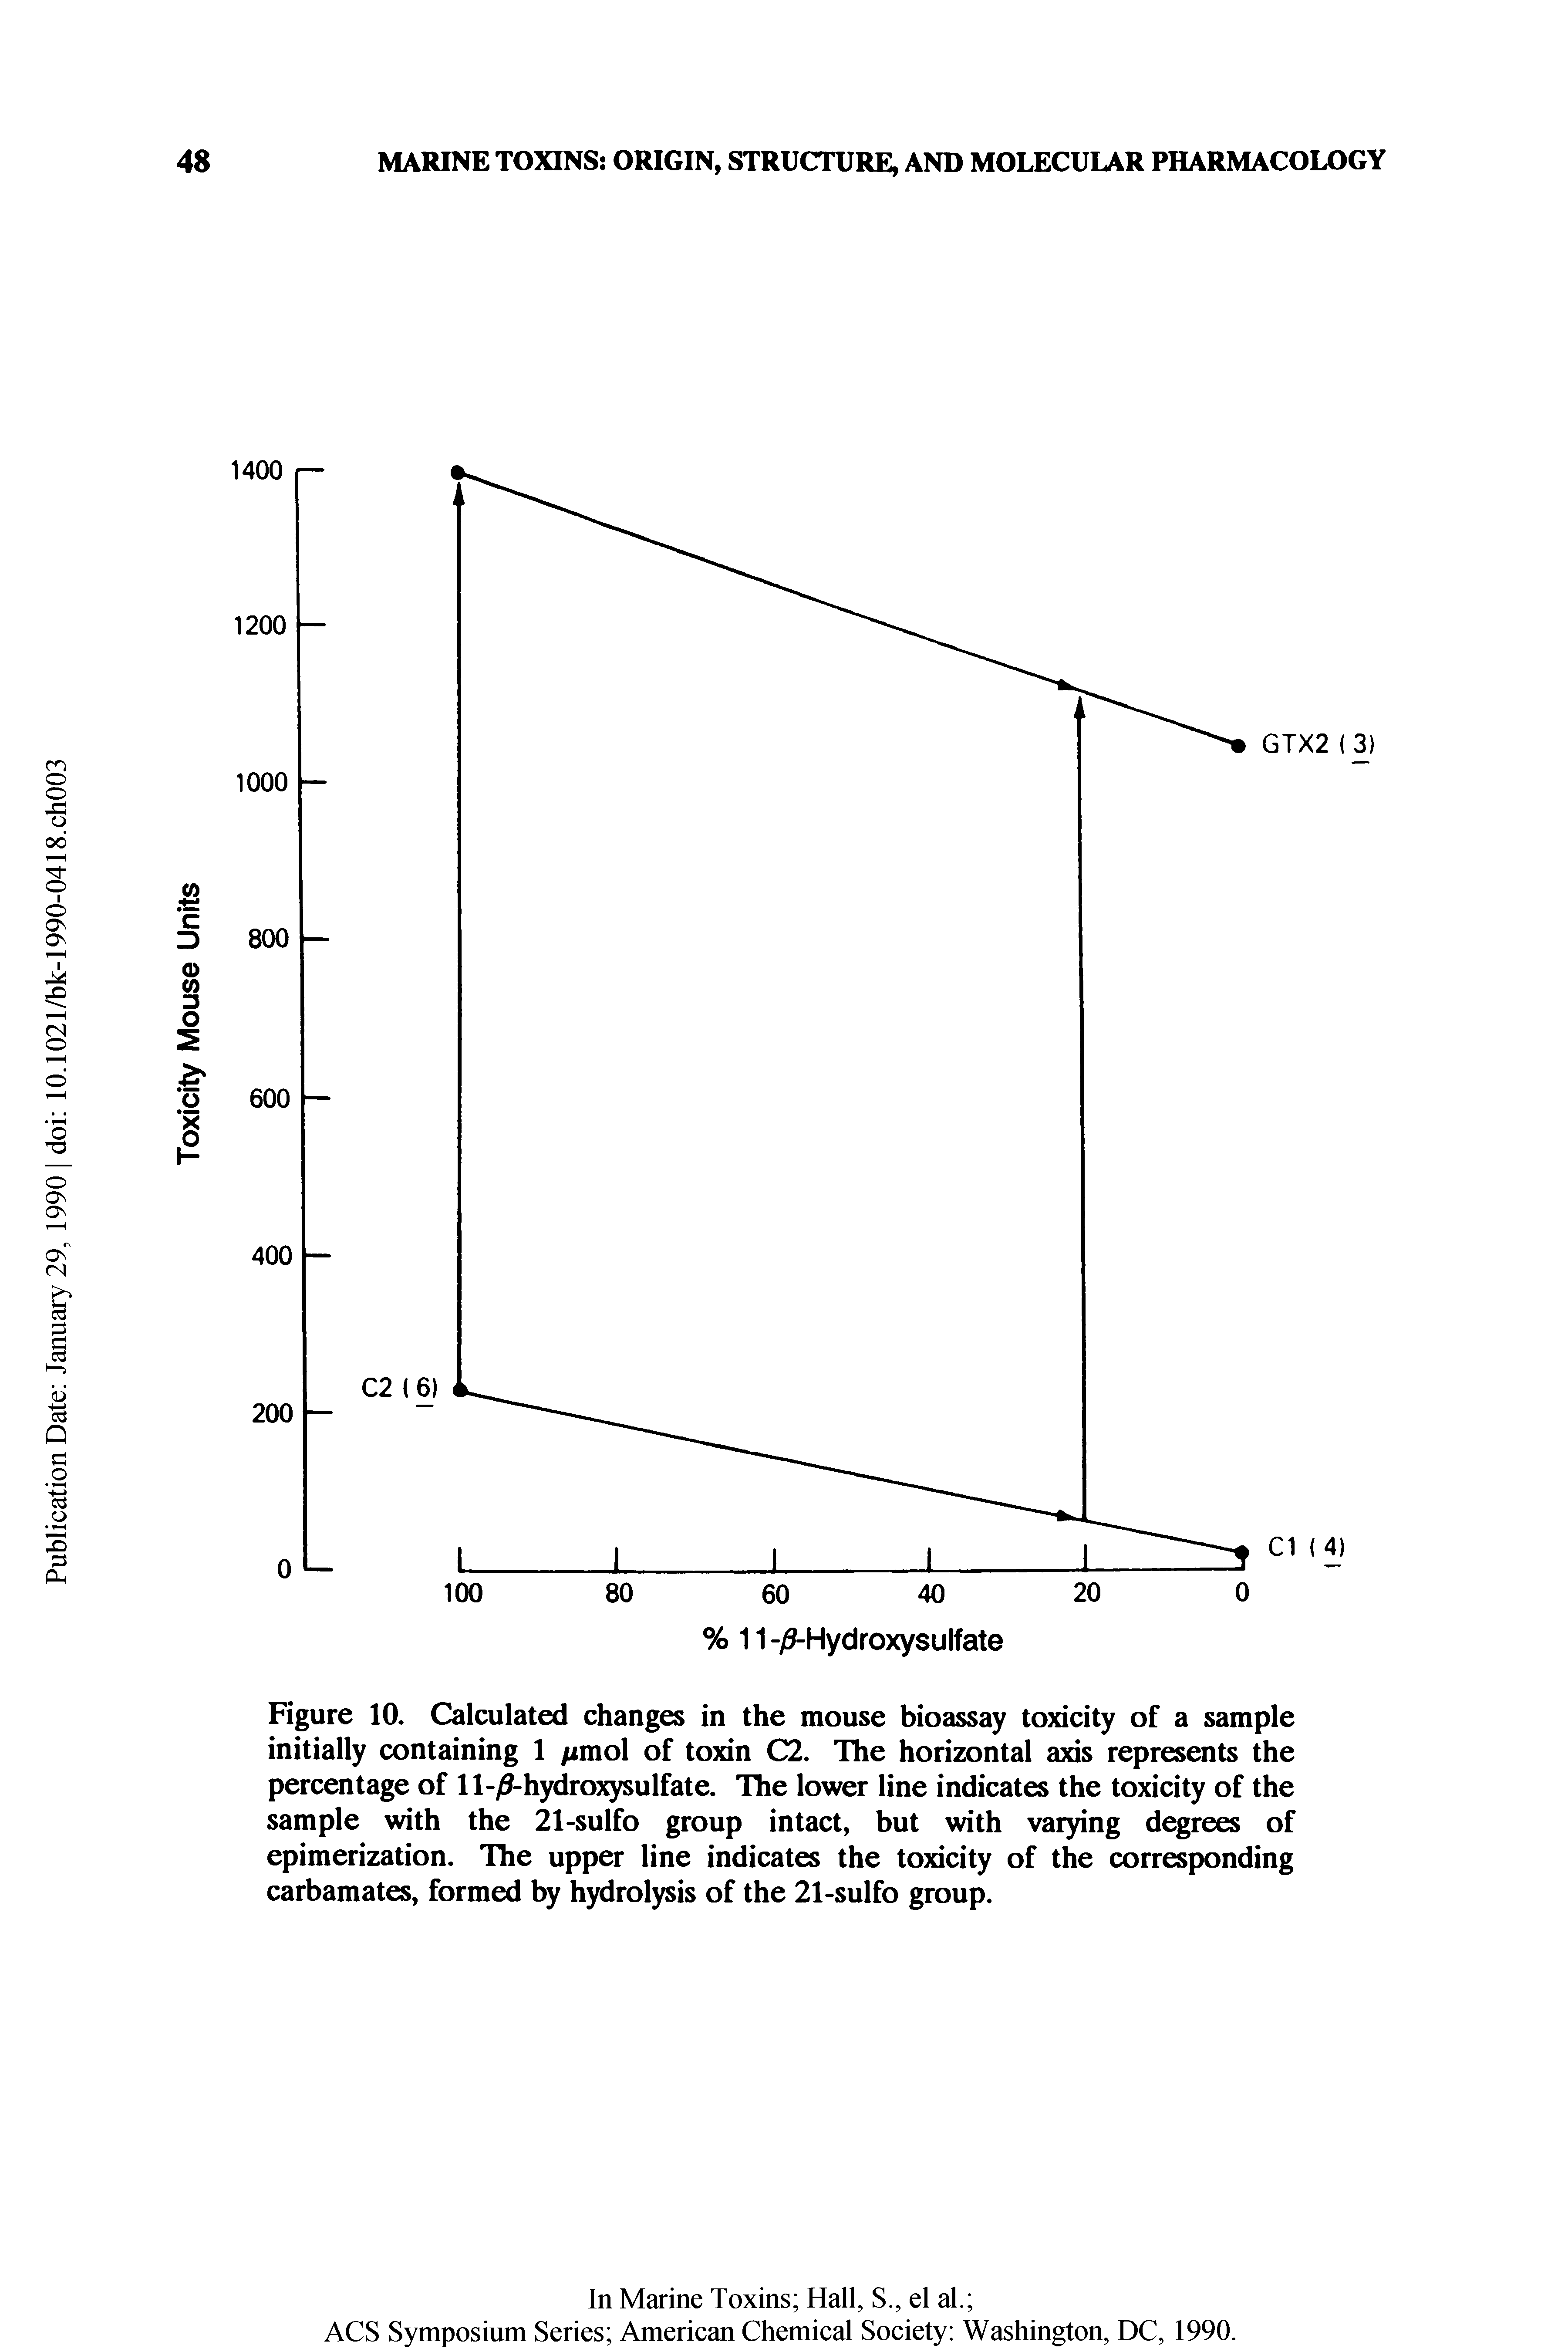 Figure 10. Calculated changes in the mouse bioassay toxicity of a sample initially containing 1 xmol of toxin C2. The horizontal axis represents the percentage of 11- -hydroxysulfate. The lower line indicates the toxicity of the sample with the 21-sulfo group intact, but with varying degrees of epimerization. The upper line indicates the toxicity of the corresponding carbamates, formed by hydrolysis of the 21-sulfo group.